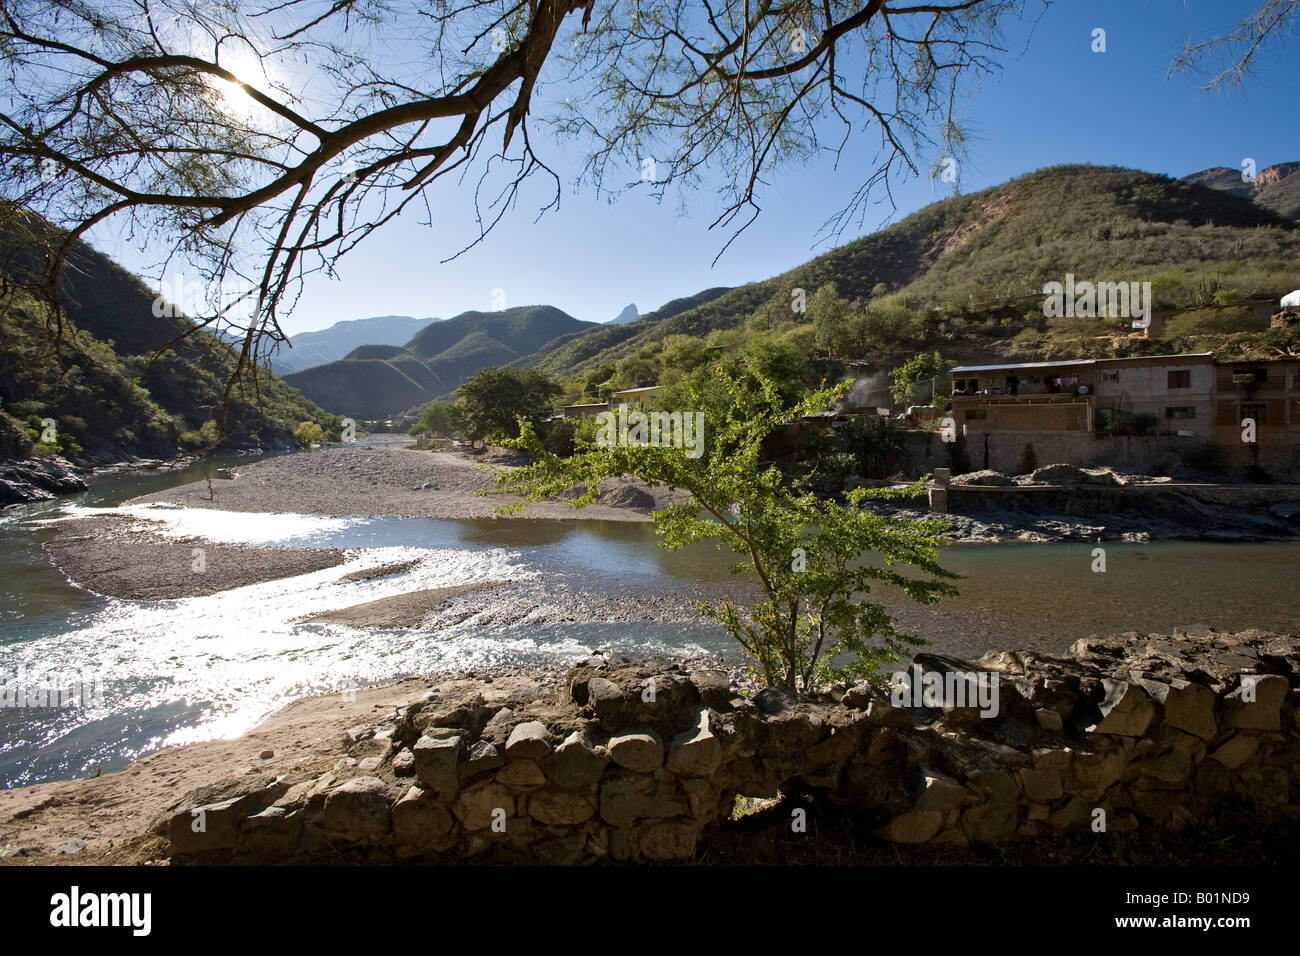 View from the ruins of San Miguel Hacienda in the town of Batopilas in the Copper Canyon area of Mexico Stock Photo